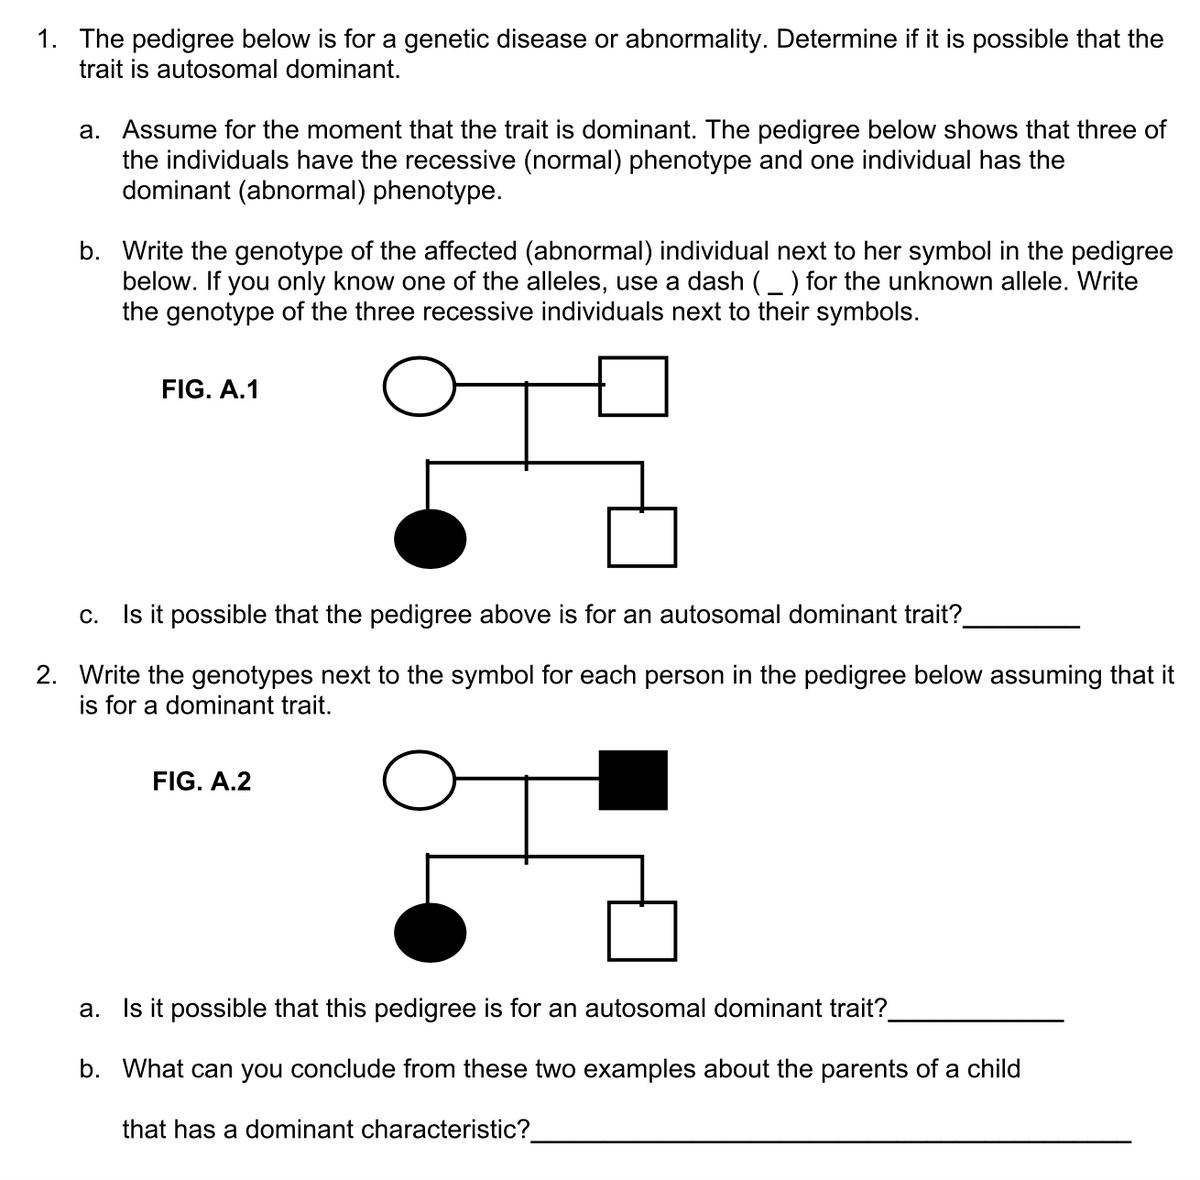 1. The pedigree below is for a genetic disease or abnormality. Determine if it is possible that the
trait is autosomal dominant.
a. Assume for the moment that the trait is dominant. The pedigree below shows that three of
the individuals have the recessive (normal) phenotype and one individual has the
dominant (abnormal) phenotype.
b. Write the genotype of the affected (abnormal) individual next to her symbol in the pedigree
below. If you only know one of the alleles, use a dash (_ ) for the unknown allele. Write
the genotype of the three recessive individuals next to their symbols.
FIG. A.1
C.
Is it possible that the pedigree above is for an autosomal dominant trait?
2. Write the genotypes next to the symbol for each person in the pedigree below assuming that it
is for a dominant trait.
FIG. A.2
a. Is it possible that this pedigree is for an autosomal dominant trait?
b. What can you conclude from these two examples about the parents of a child
that has a dominant characteristic?
